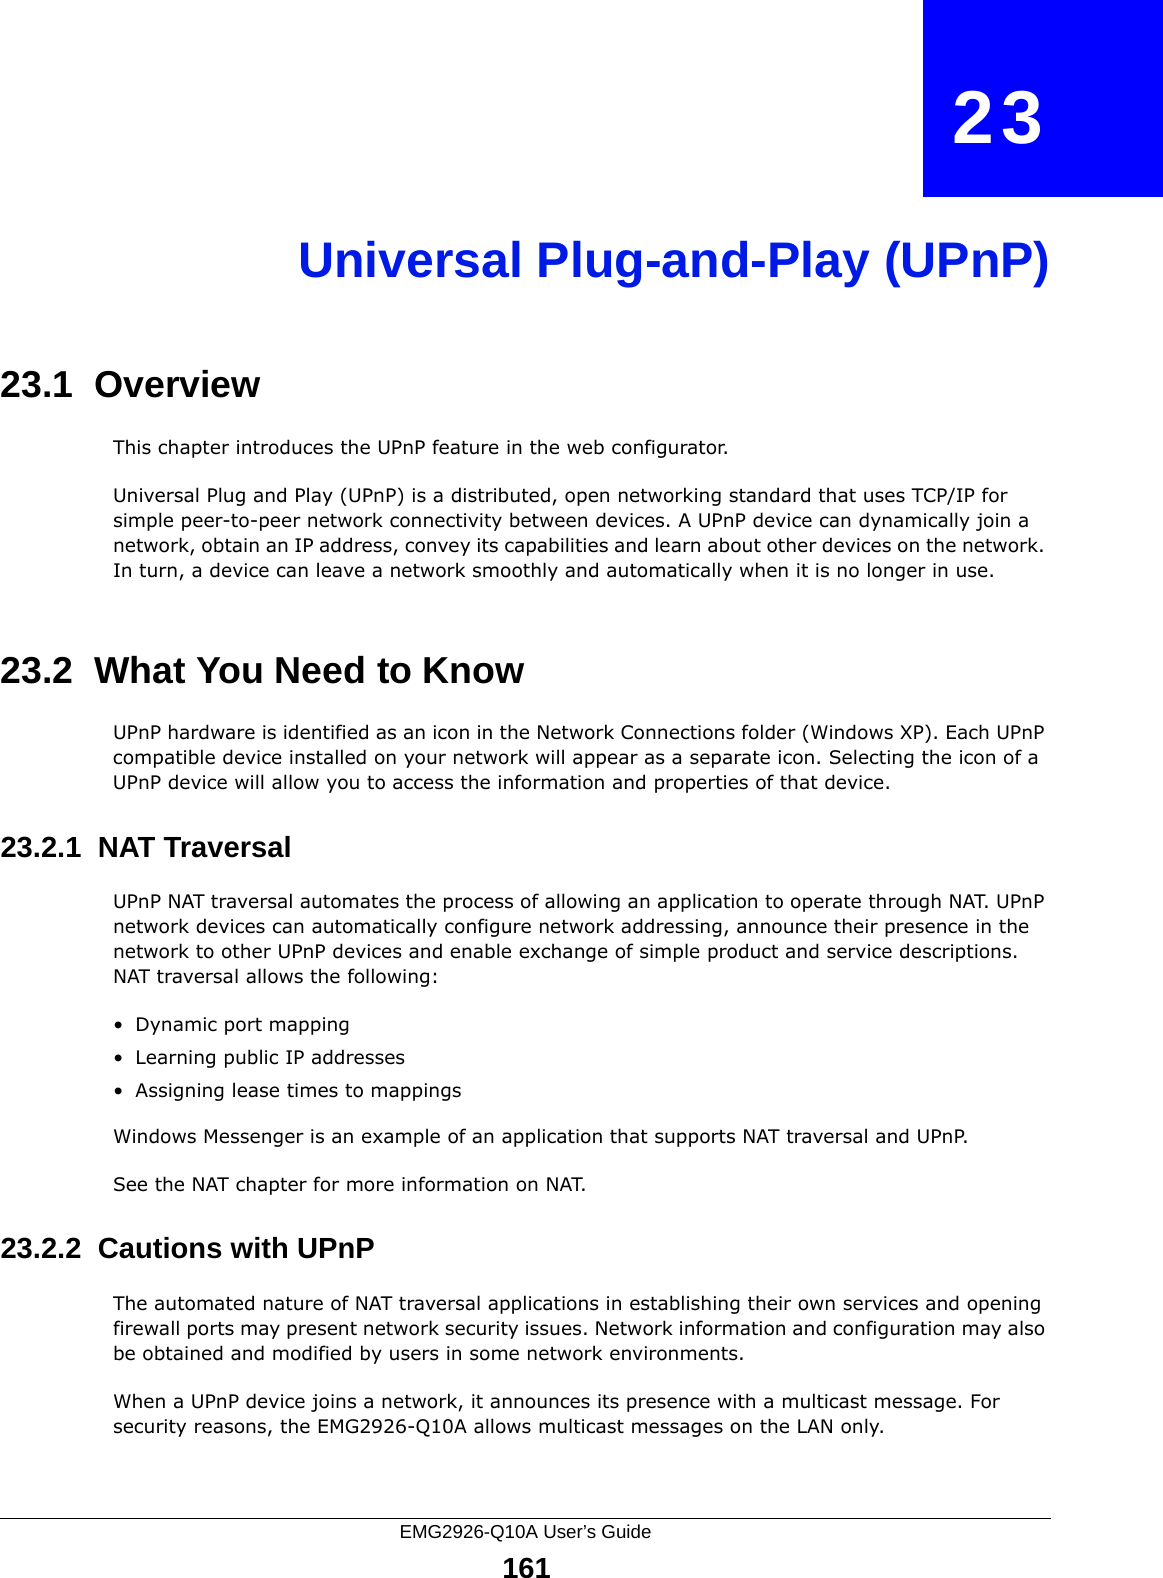 EMG2926-Q10A User’s Guide161CHAPTER   23Universal Plug-and-Play (UPnP)23.1  Overview This chapter introduces the UPnP feature in the web configurator.Universal Plug and Play (UPnP) is a distributed, open networking standard that uses TCP/IP for simple peer-to-peer network connectivity between devices. A UPnP device can dynamically join a network, obtain an IP address, convey its capabilities and learn about other devices on the network. In turn, a device can leave a network smoothly and automatically when it is no longer in use.23.2  What You Need to KnowUPnP hardware is identified as an icon in the Network Connections folder (Windows XP). Each UPnP compatible device installed on your network will appear as a separate icon. Selecting the icon of a UPnP device will allow you to access the information and properties of that device. 23.2.1  NAT TraversalUPnP NAT traversal automates the process of allowing an application to operate through NAT. UPnP network devices can automatically configure network addressing, announce their presence in the network to other UPnP devices and enable exchange of simple product and service descriptions. NAT traversal allows the following:• Dynamic port mapping• Learning public IP addresses• Assigning lease times to mappingsWindows Messenger is an example of an application that supports NAT traversal and UPnP. See the NAT chapter for more information on NAT.23.2.2  Cautions with UPnPThe automated nature of NAT traversal applications in establishing their own services and opening firewall ports may present network security issues. Network information and configuration may also be obtained and modified by users in some network environments. When a UPnP device joins a network, it announces its presence with a multicast message. For security reasons, the EMG2926-Q10A allows multicast messages on the LAN only.